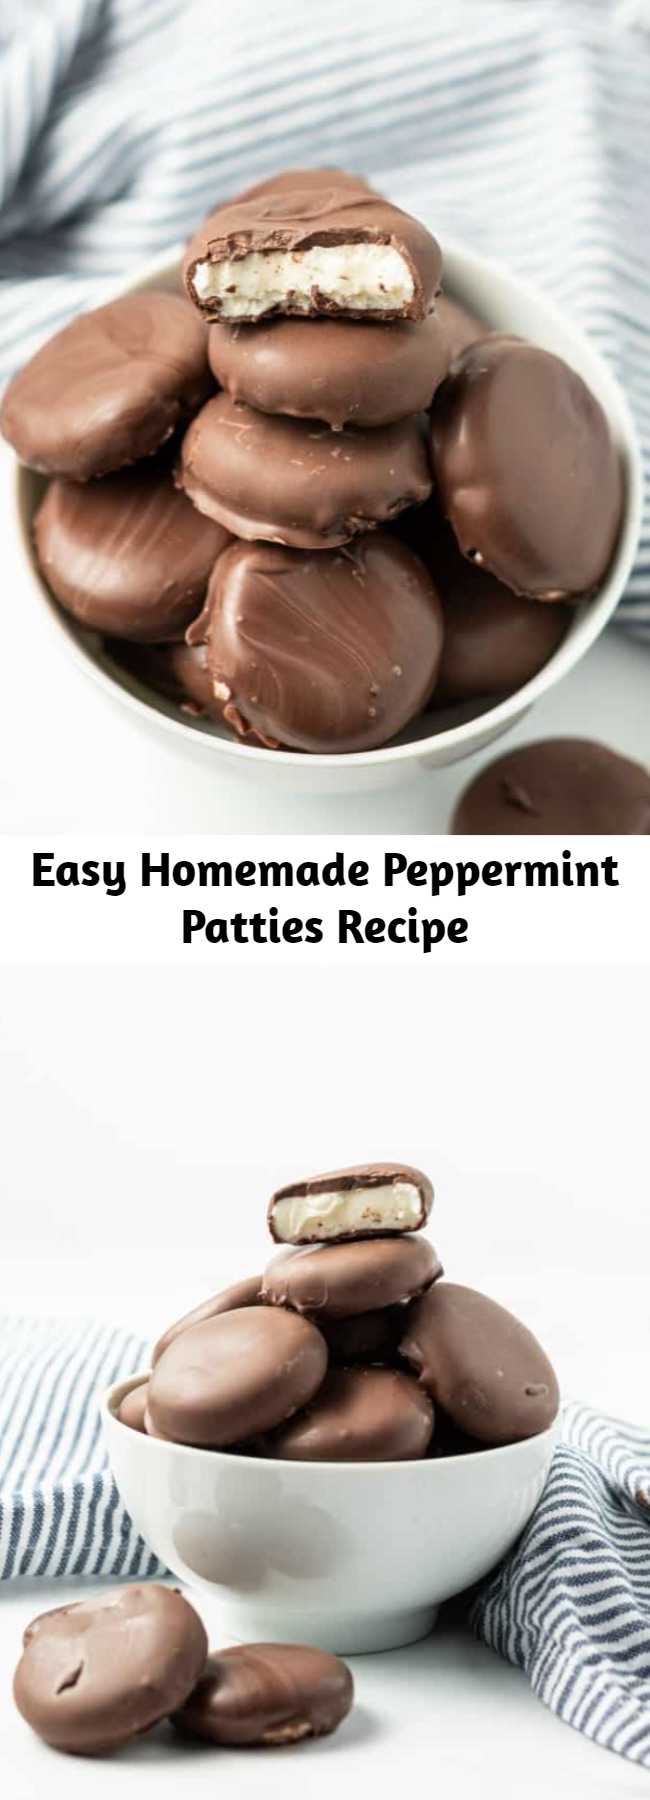 Easy Homemade Peppermint Patties Recipe - Peppermint filling wrapped in sweet chocolate; this Peppermint Patty recipe is easier than you ever realized. Skip the store bought candies and make your own! Shape them like footballs for a game day treat!